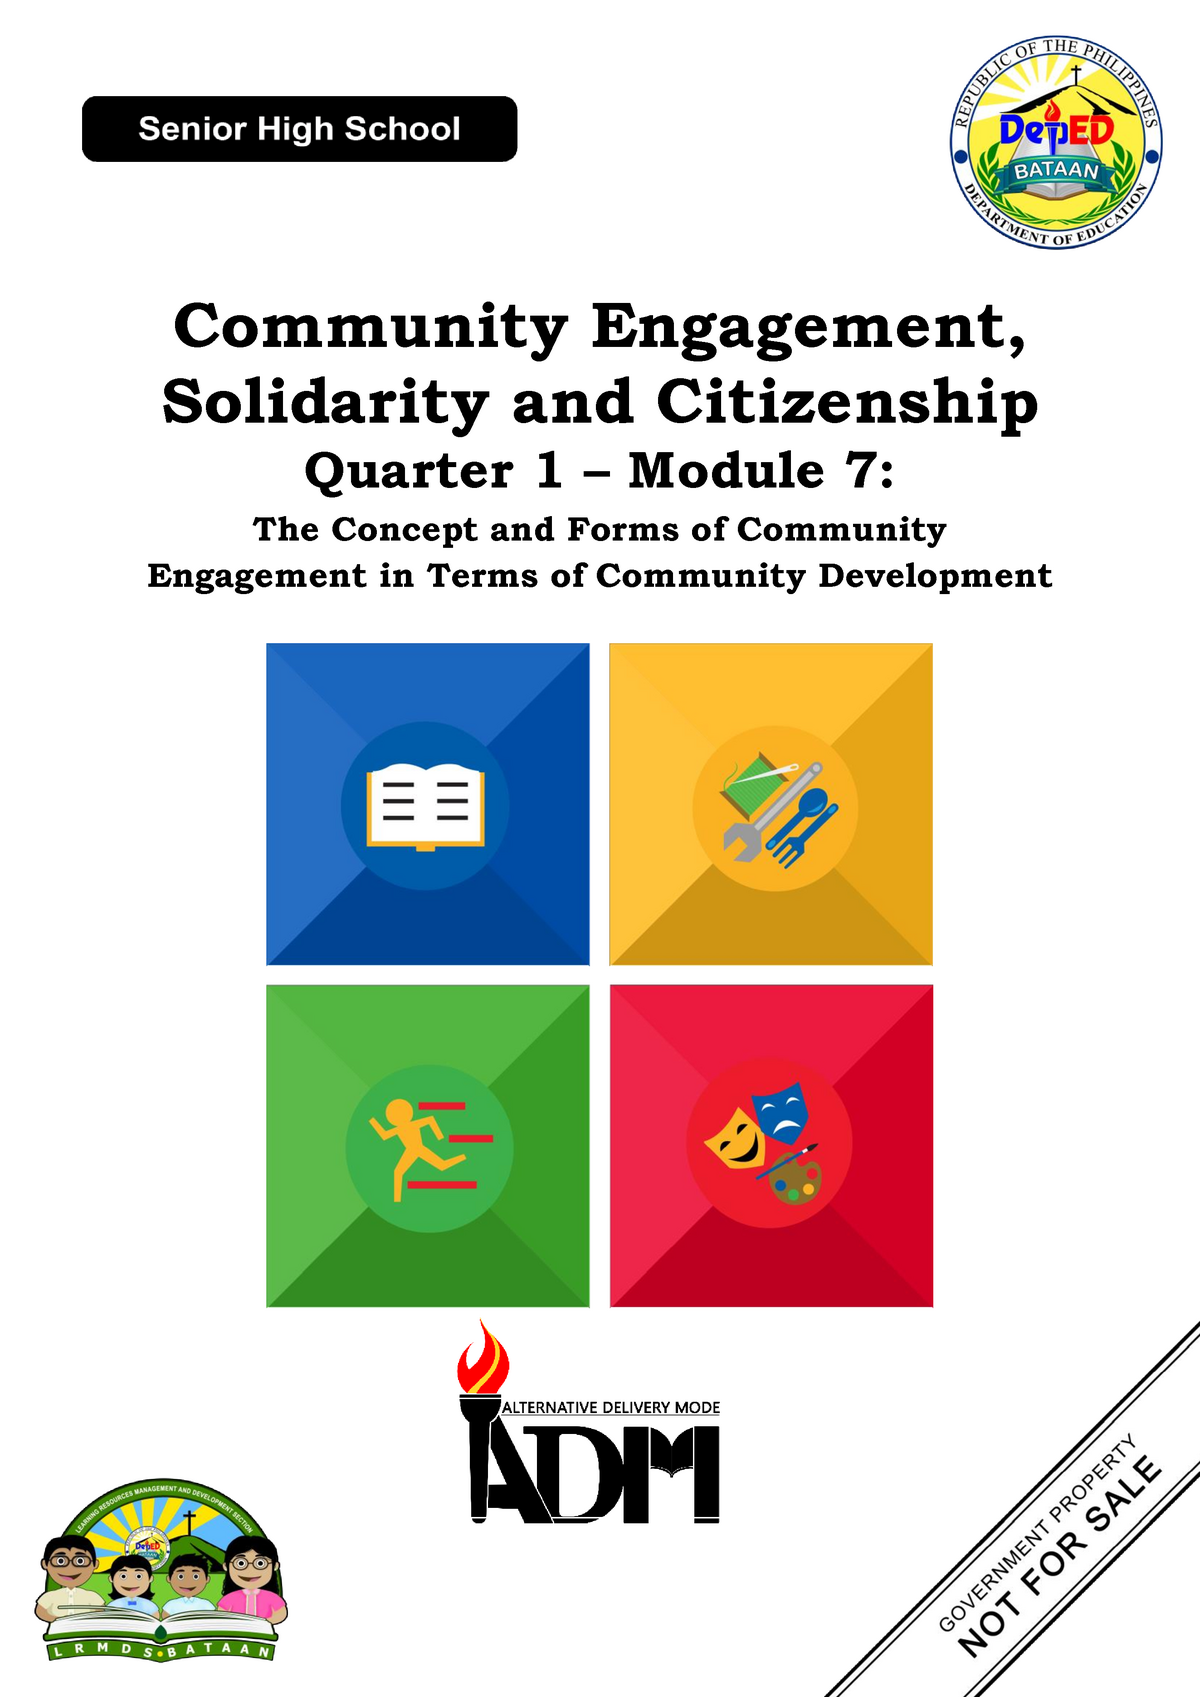 essay about community community engagement and solidarity